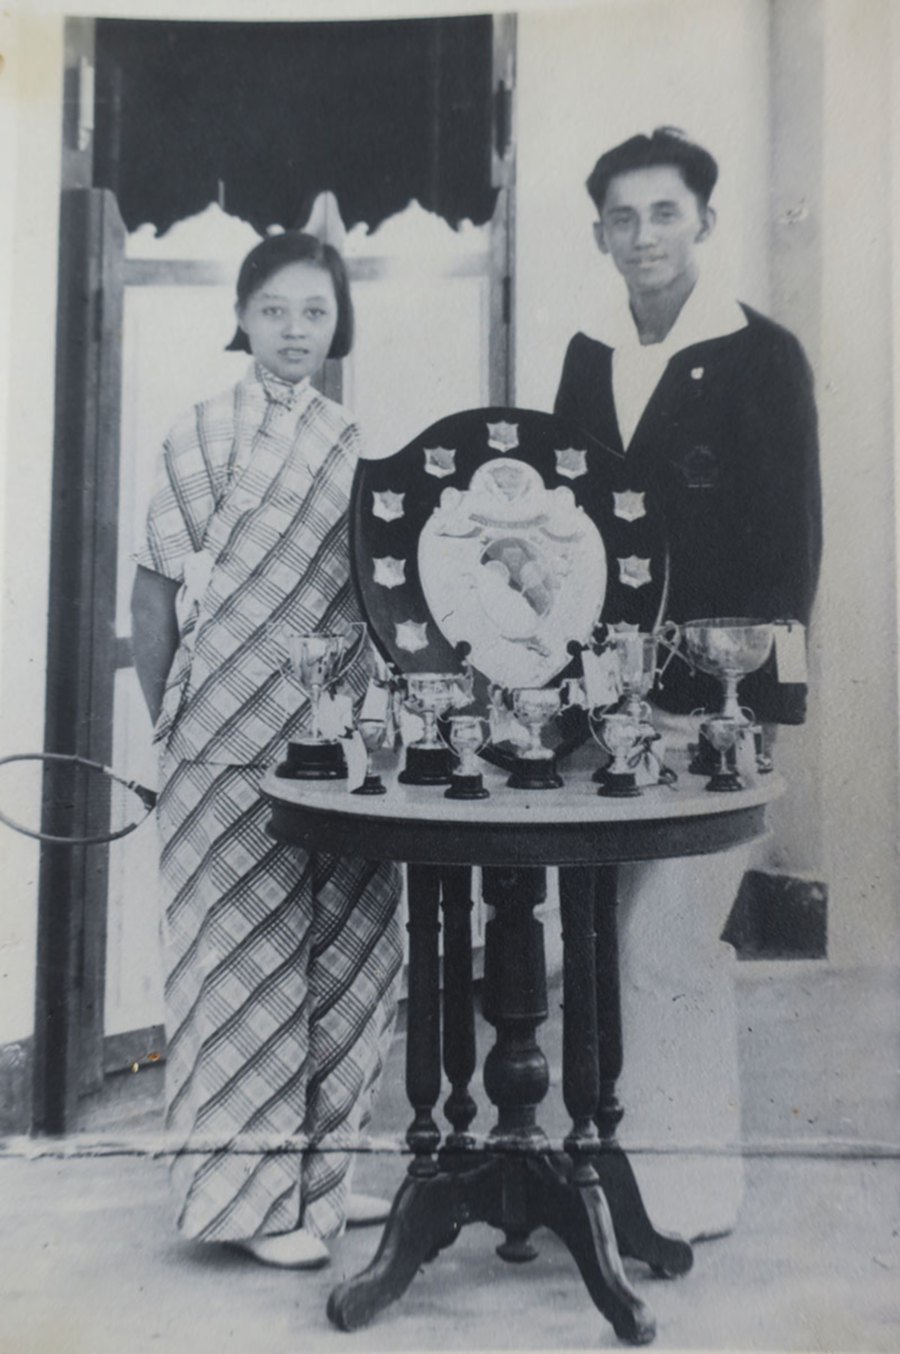 Grandma and grandfather, mixed doubles champions with some of their trophies at the front porch of No. 154 Jalan Ngee Heng. 